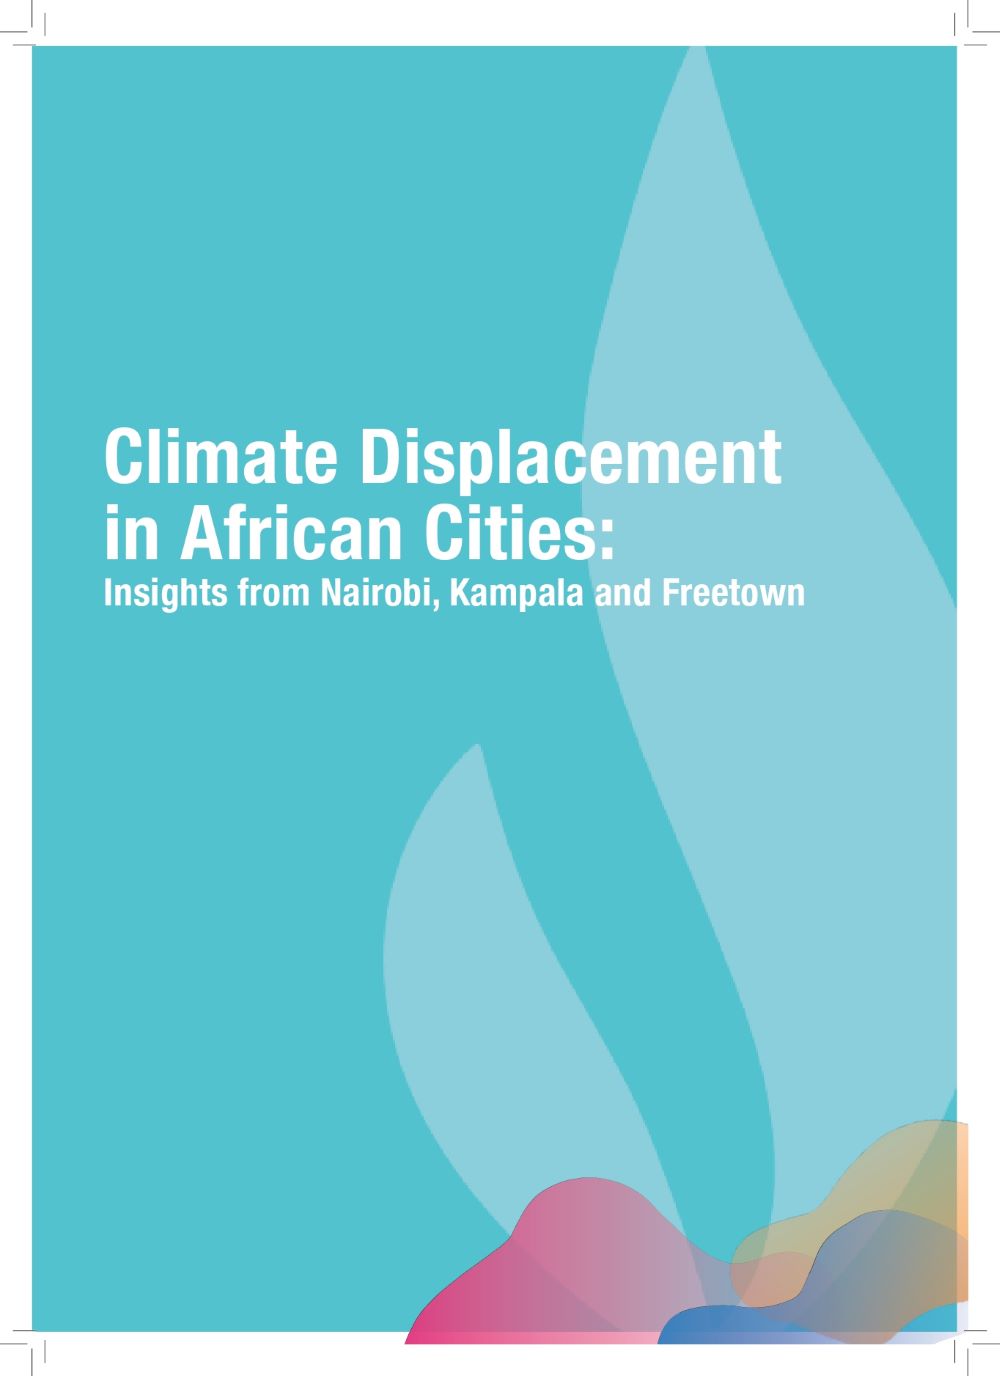 Climate Displacement in African Cities: Insights from Nairobi, Kampala and Freetown